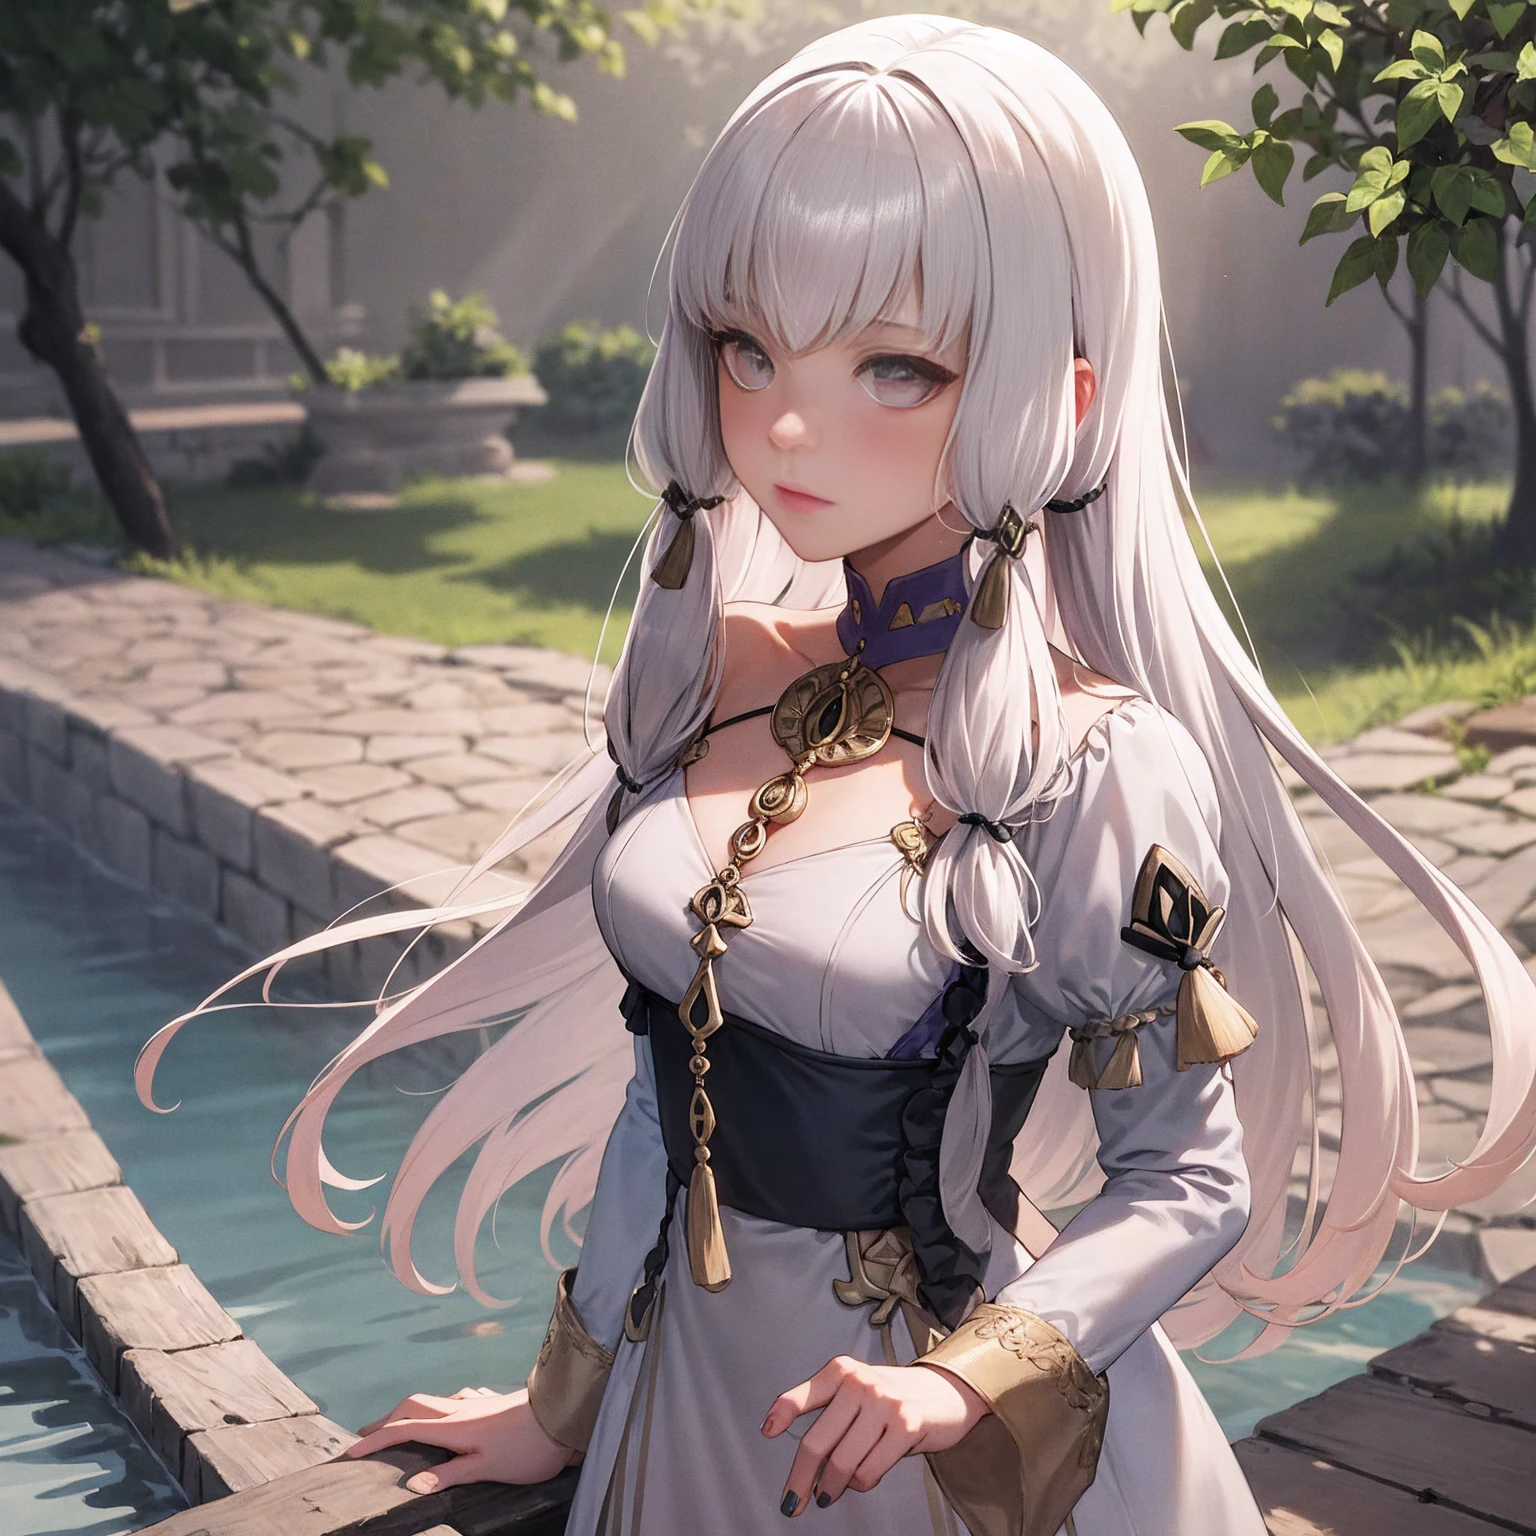 Lysithea von Ordelia is depicted in this artwork as a serene and captivating figure. She is portrayed as a young girl with long, straight hair and mesmerizing eyes. Her hair is styled in low twintails, giving her a unique appearance. The artwork is presented in a monochrome greyscale, with the exception of a few elements. Lysithea is shown in an upper body shot, wearing a flowing dress that adds to her poised posture. Her porcelain skin is accentuated by a subtle blush, giving her a delicate and ethereal look. She is adorned with a crystal pendant, which adds a touch of elegance to her overall appearance. The artwork takes place during the golden hour, as indicated by the warm tones, sun flare, and soft shadows. This lighting technique enhances the vibrant colors, creating a painterly effect that adds to the dreamy atmosphere of the piece. The scene is set against a scenic lake, with distant mountains and a willow tree. The calm water reflects the sunlit clouds, contributing to the peaceful ambiance and idyllic sunset. The level of detail in this official art is remarkable, with every element meticulously rendered. The artwork is presented in unity 8k wallpaper resolution, allowing viewers to appreciate the intricate details. Additionally, the zentangle and mandala elements add a touch of complexity to the overall composition.